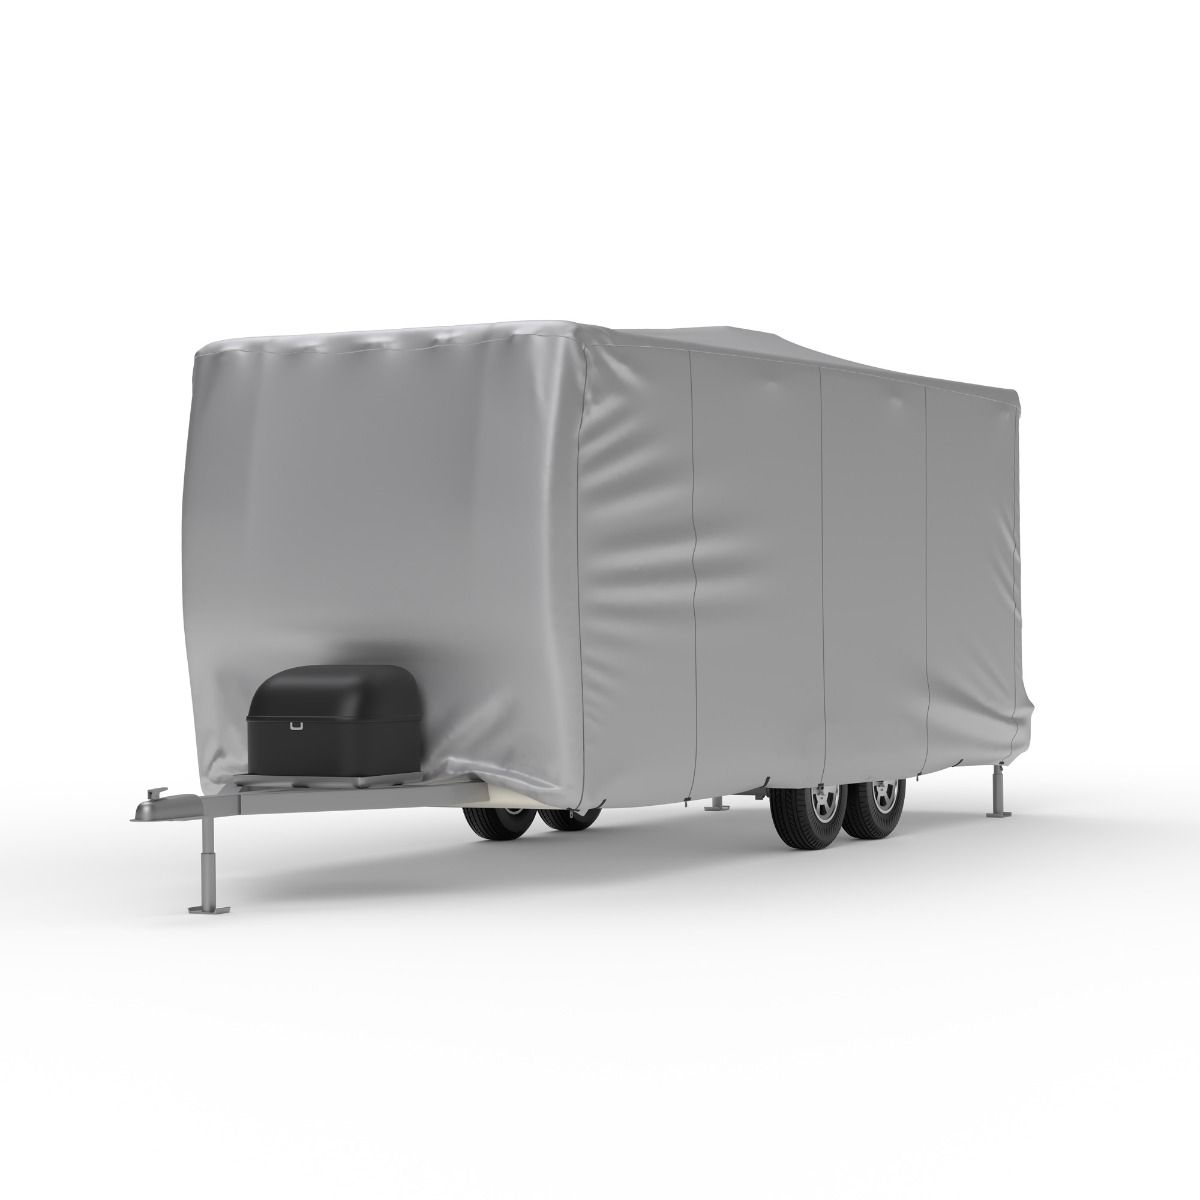 Platinum Shield Travel Trailer RV Cover (Fits 26.5' to 29.5' Long)